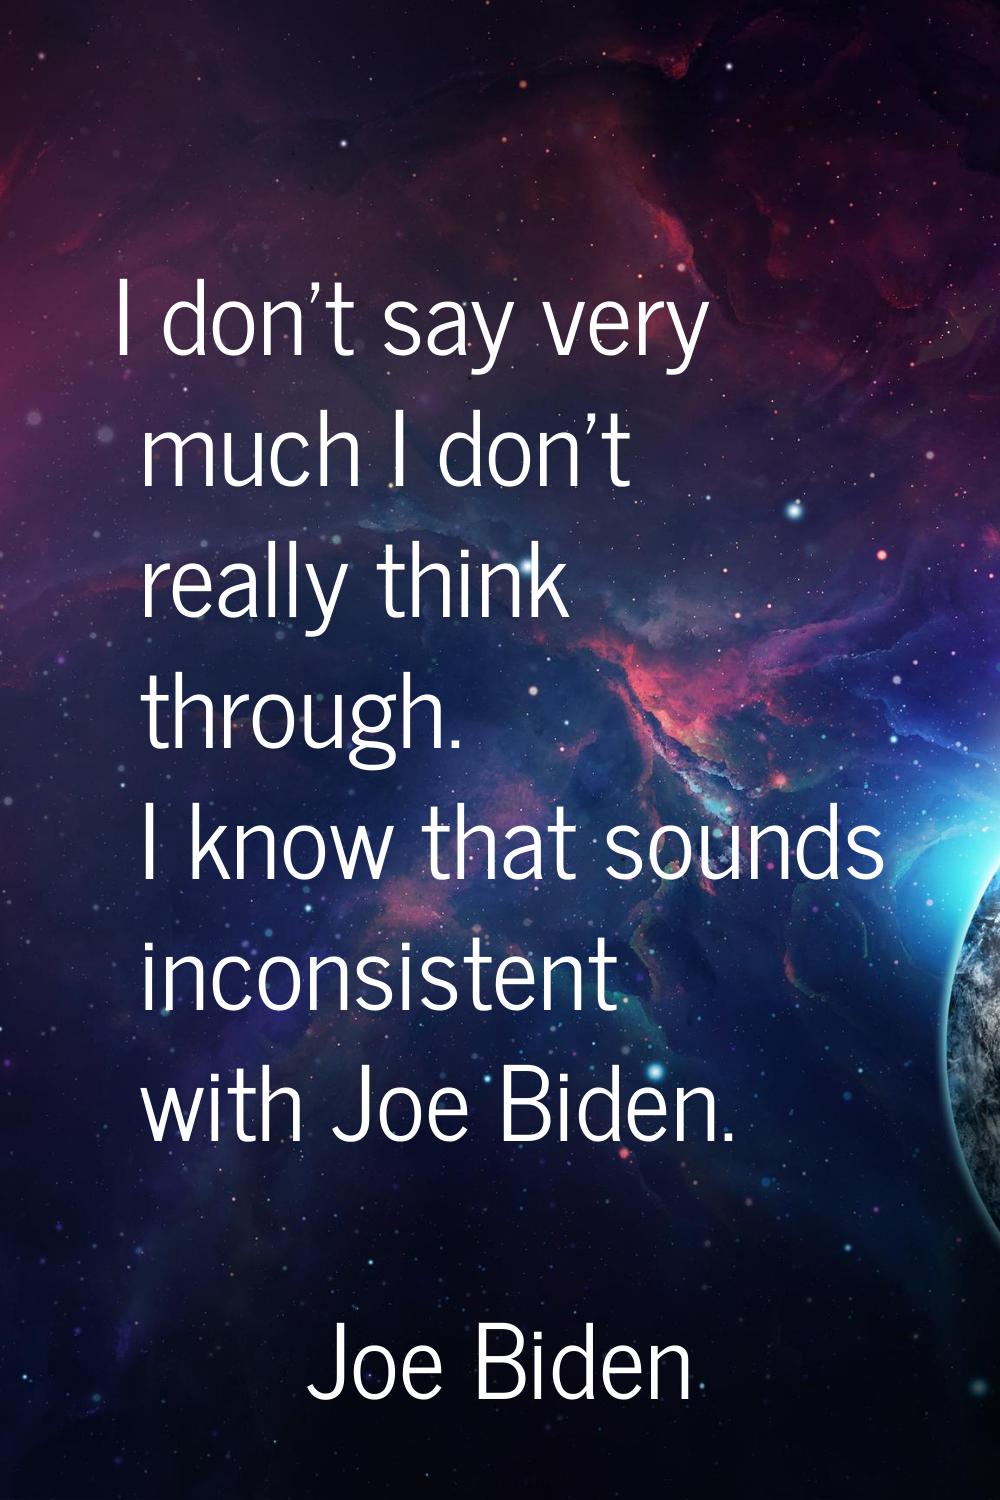 I don't say very much I don't really think through. I know that sounds inconsistent with Joe Biden.